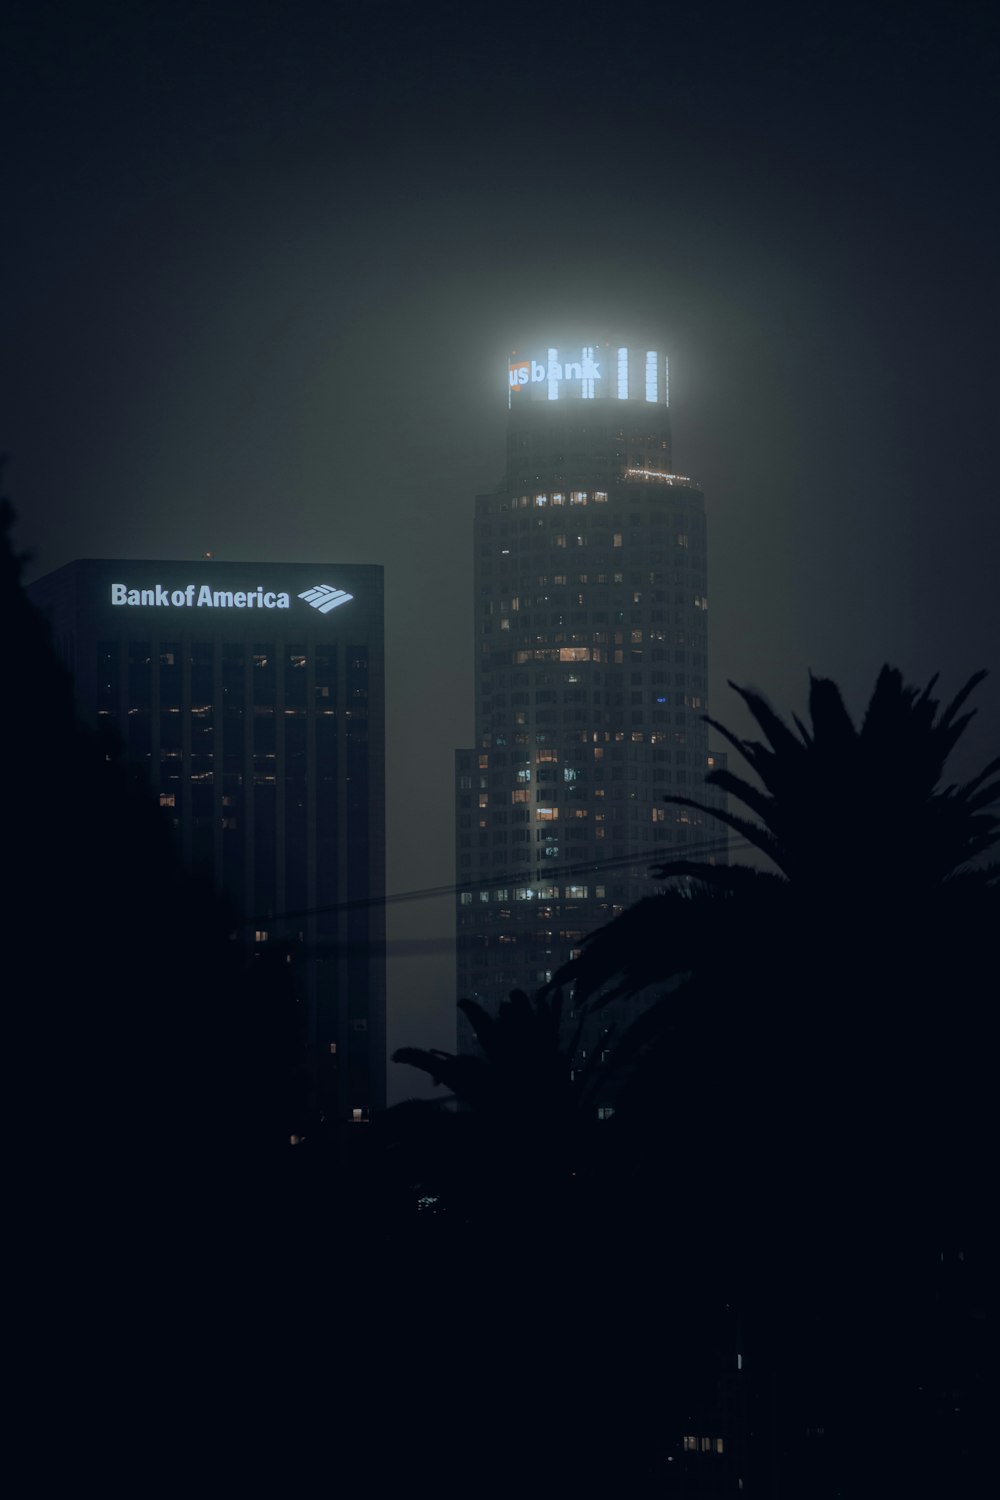 the bank of america building is lit up at night